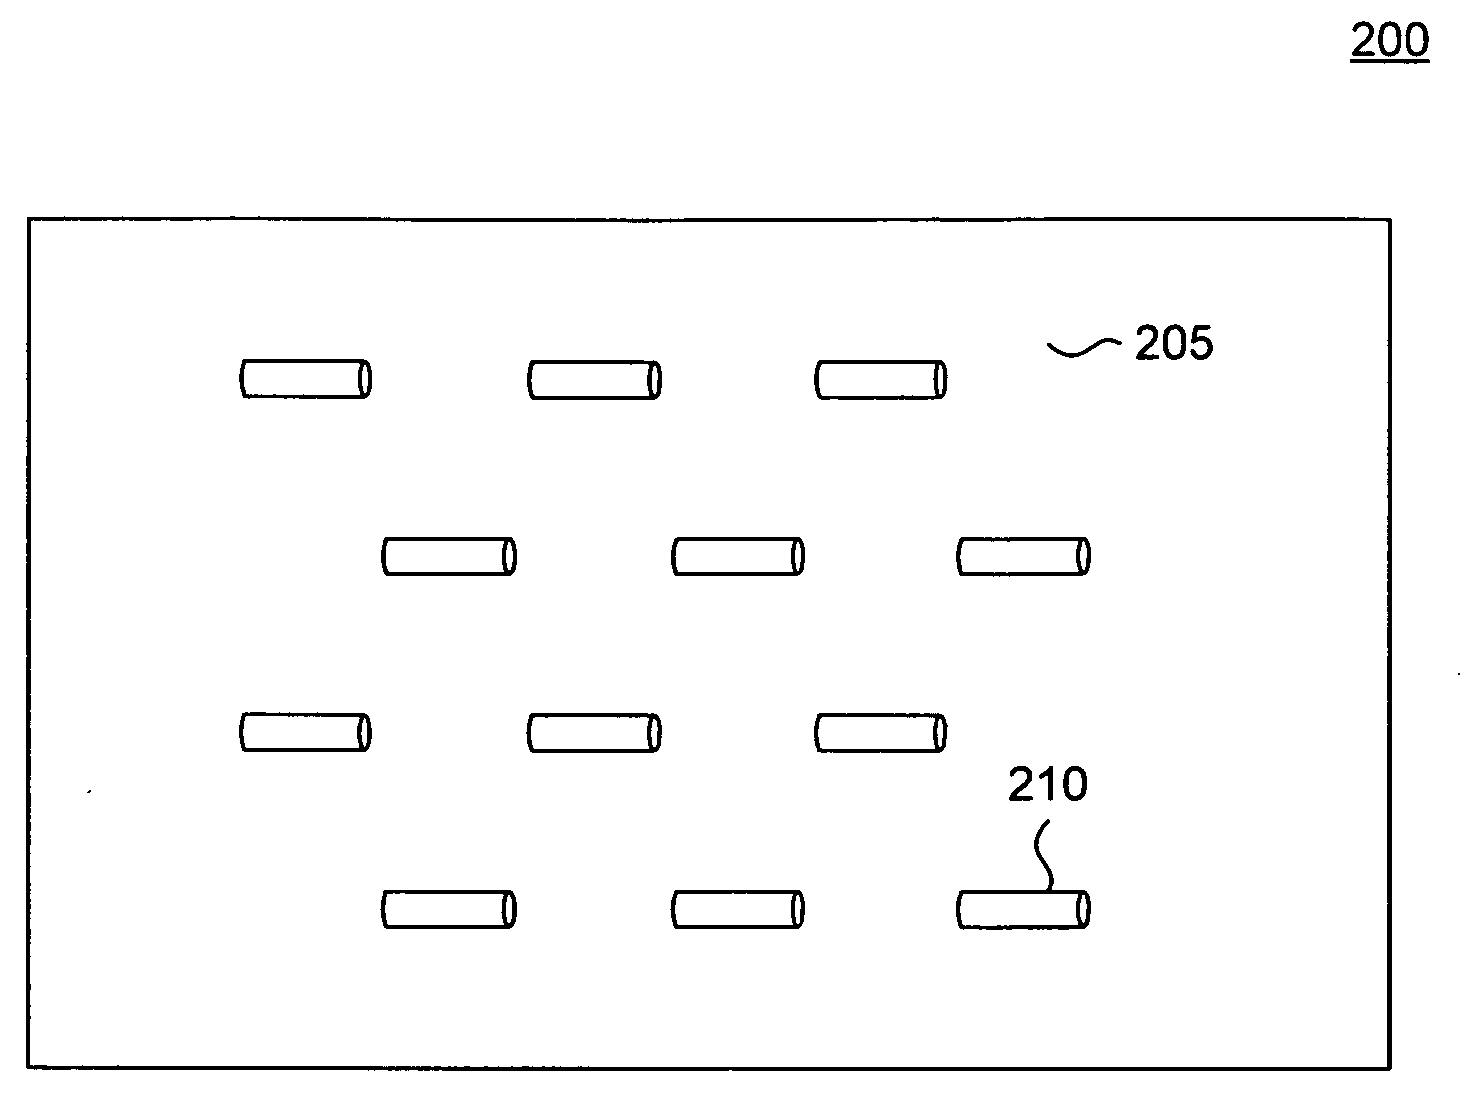 Continuously variable graded artificial dielectrics using nanostructures